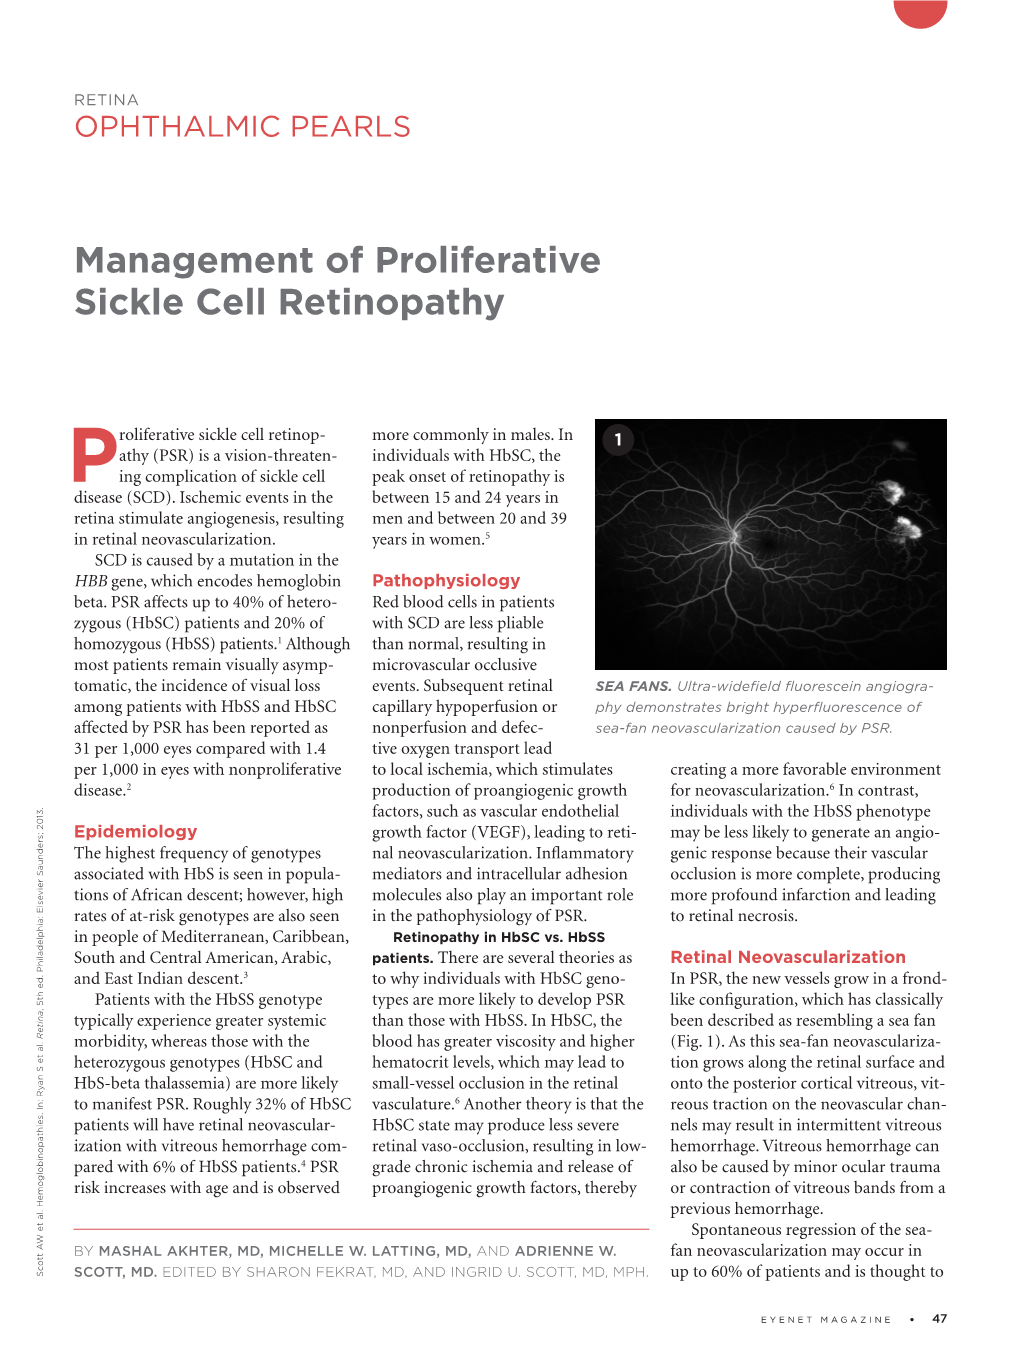 Management of Proliferative Sickle Cell Retinopathy